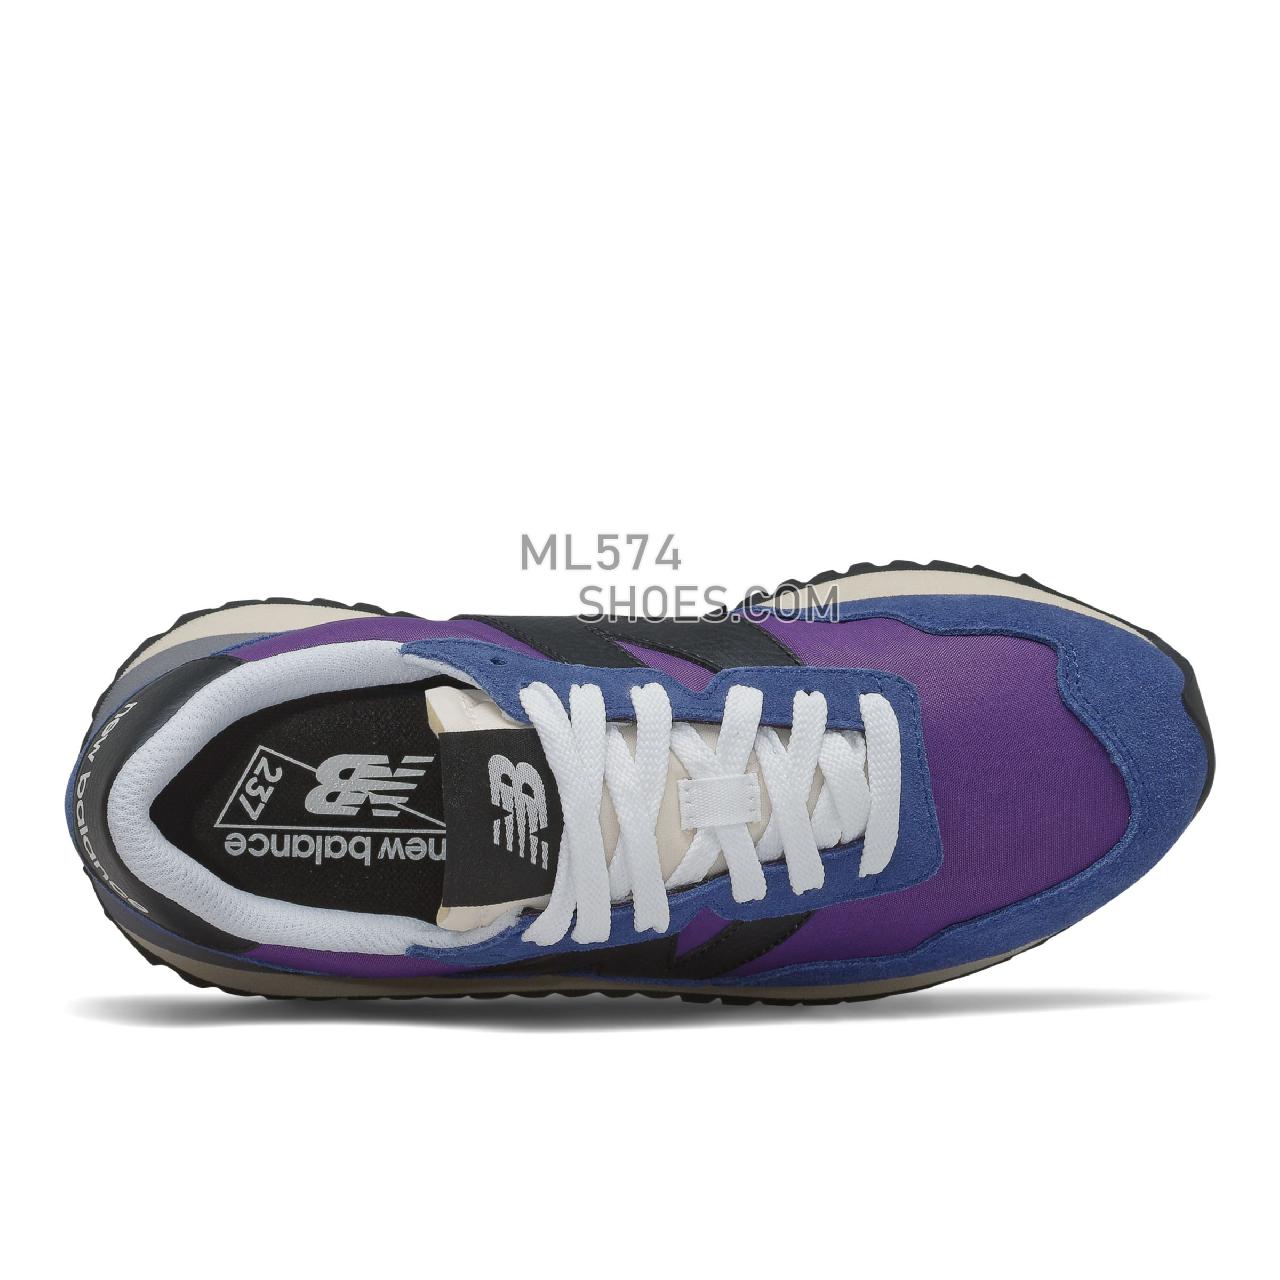 New Balance 237 - Women's Classic Sneakers - Prism Purple with Atlantic - WS237SA